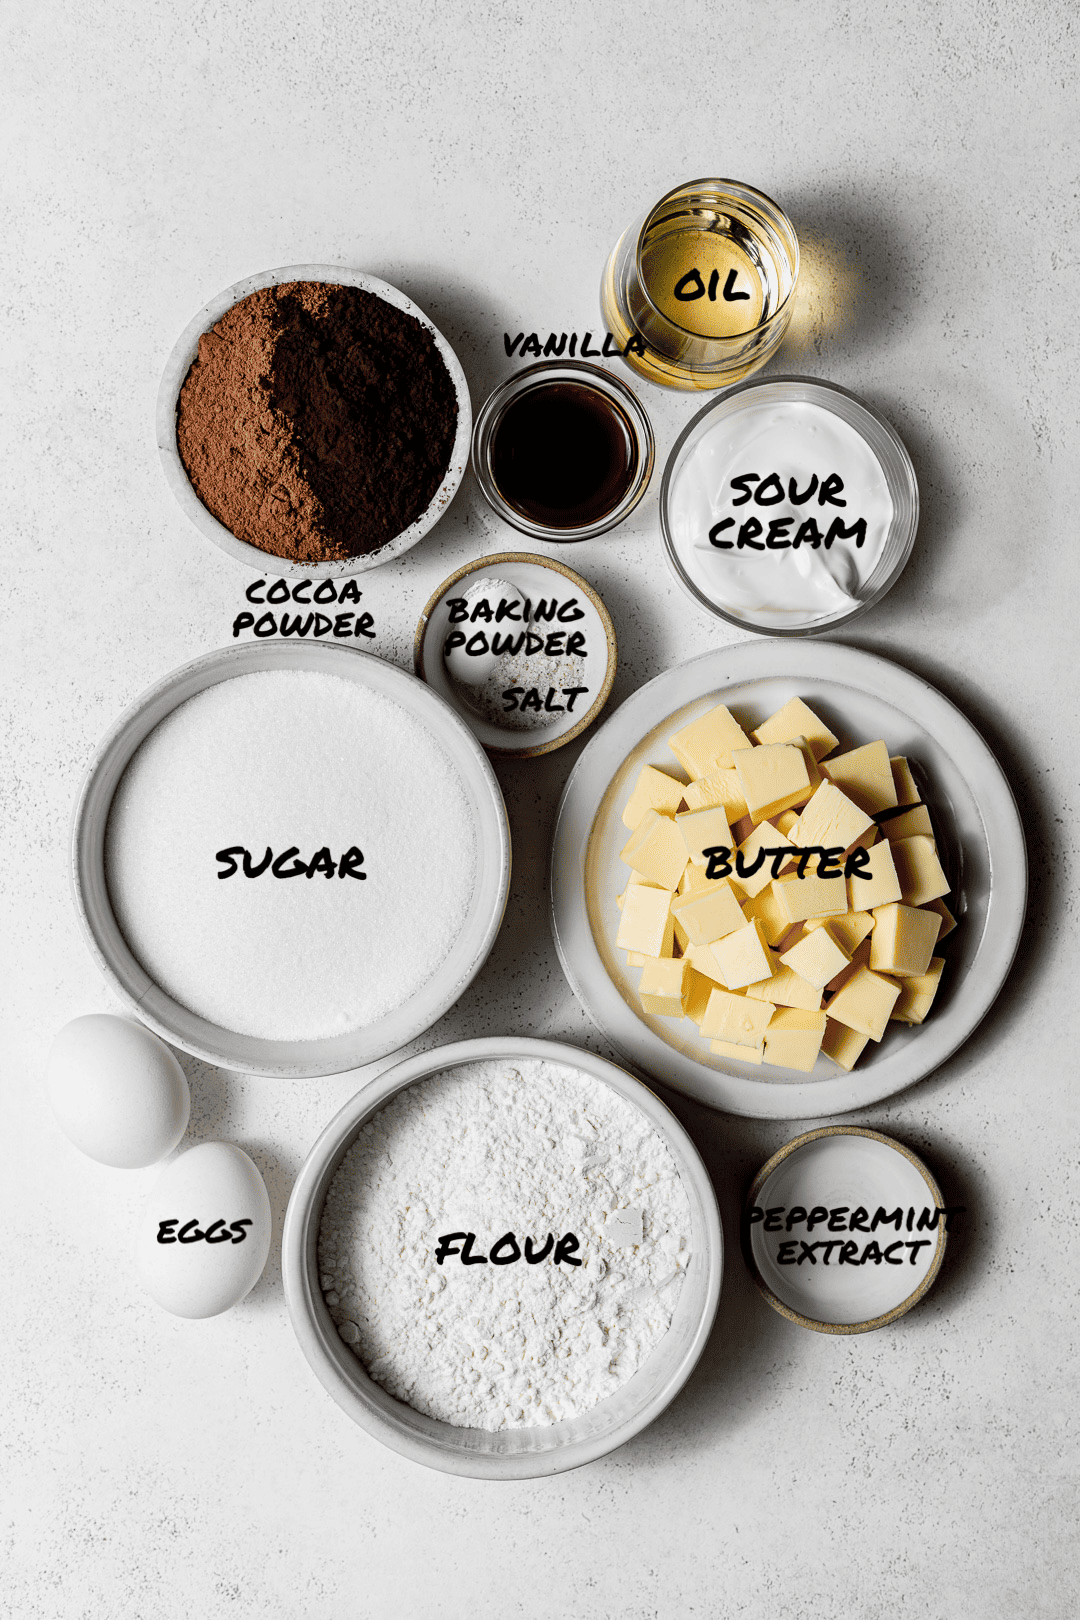 ingredients for the chocolate cake.